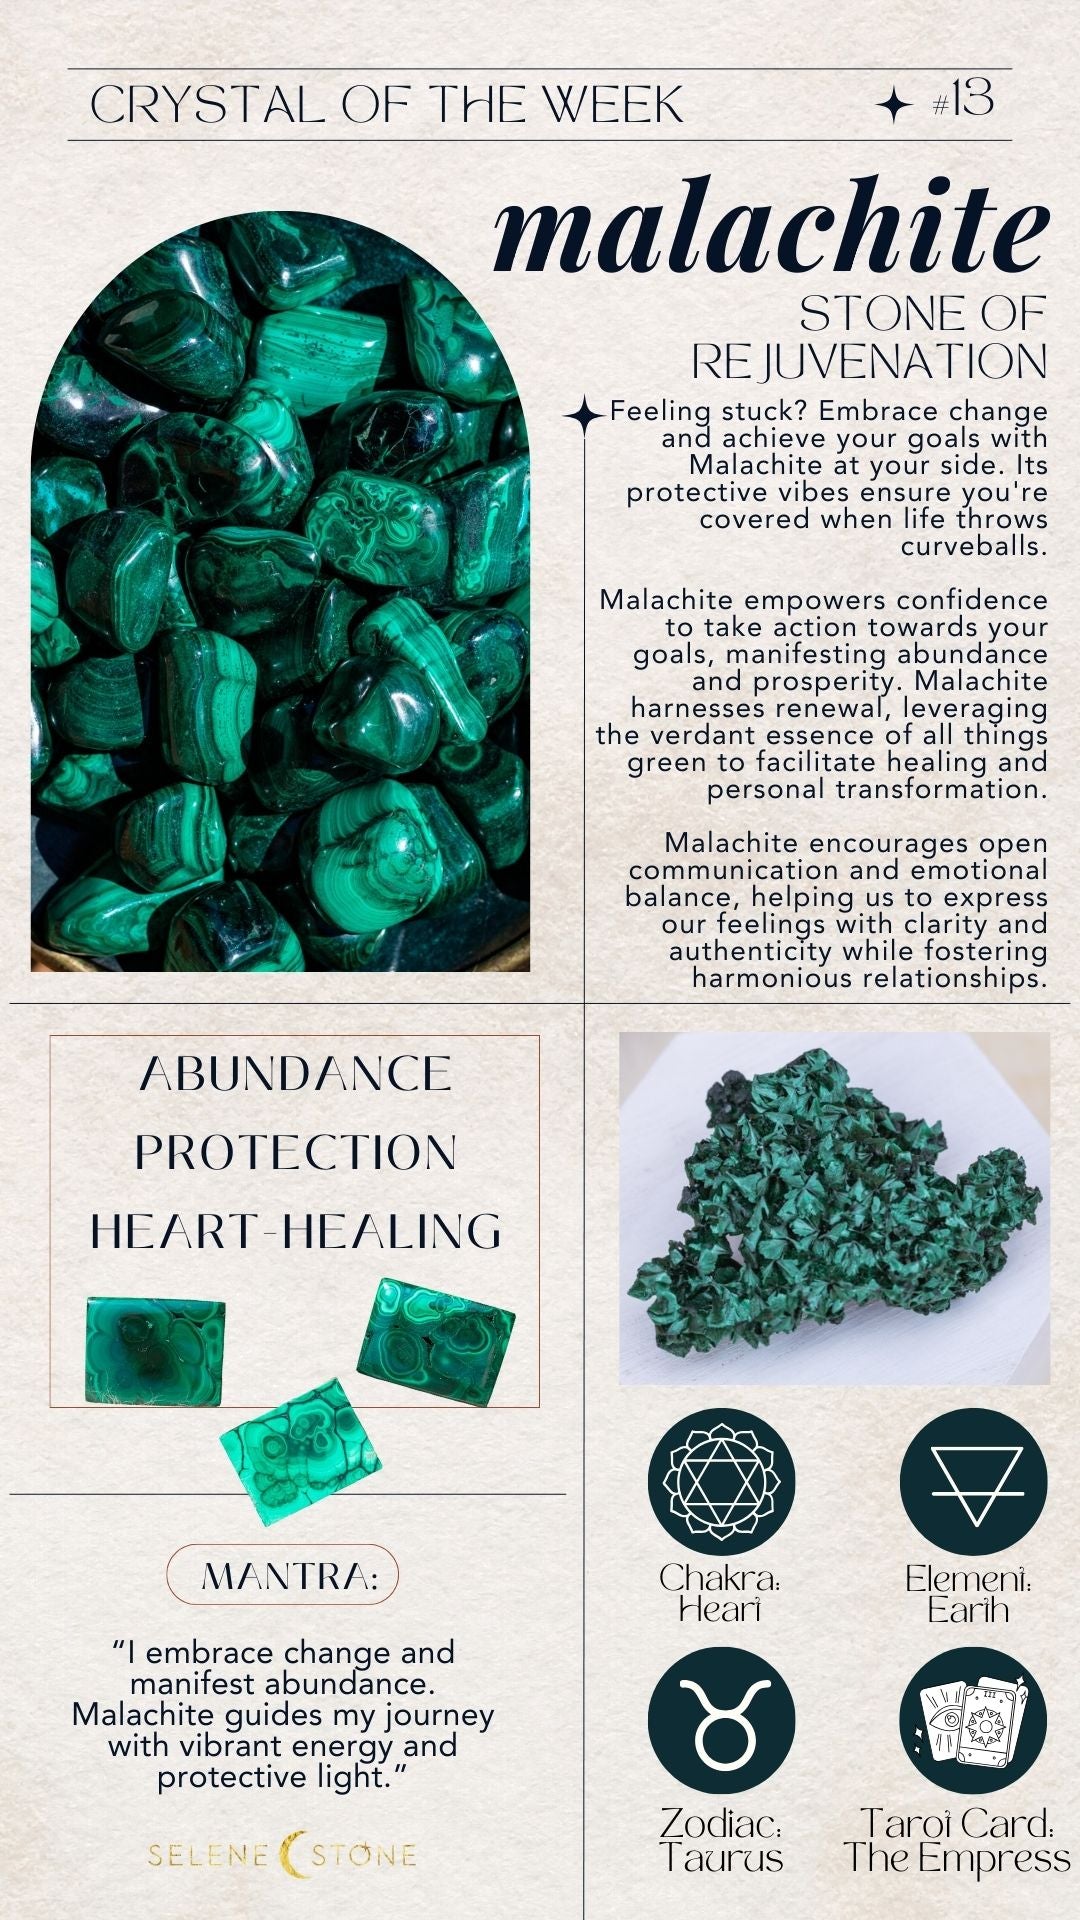 infographic about malachite and its crystal healing properties